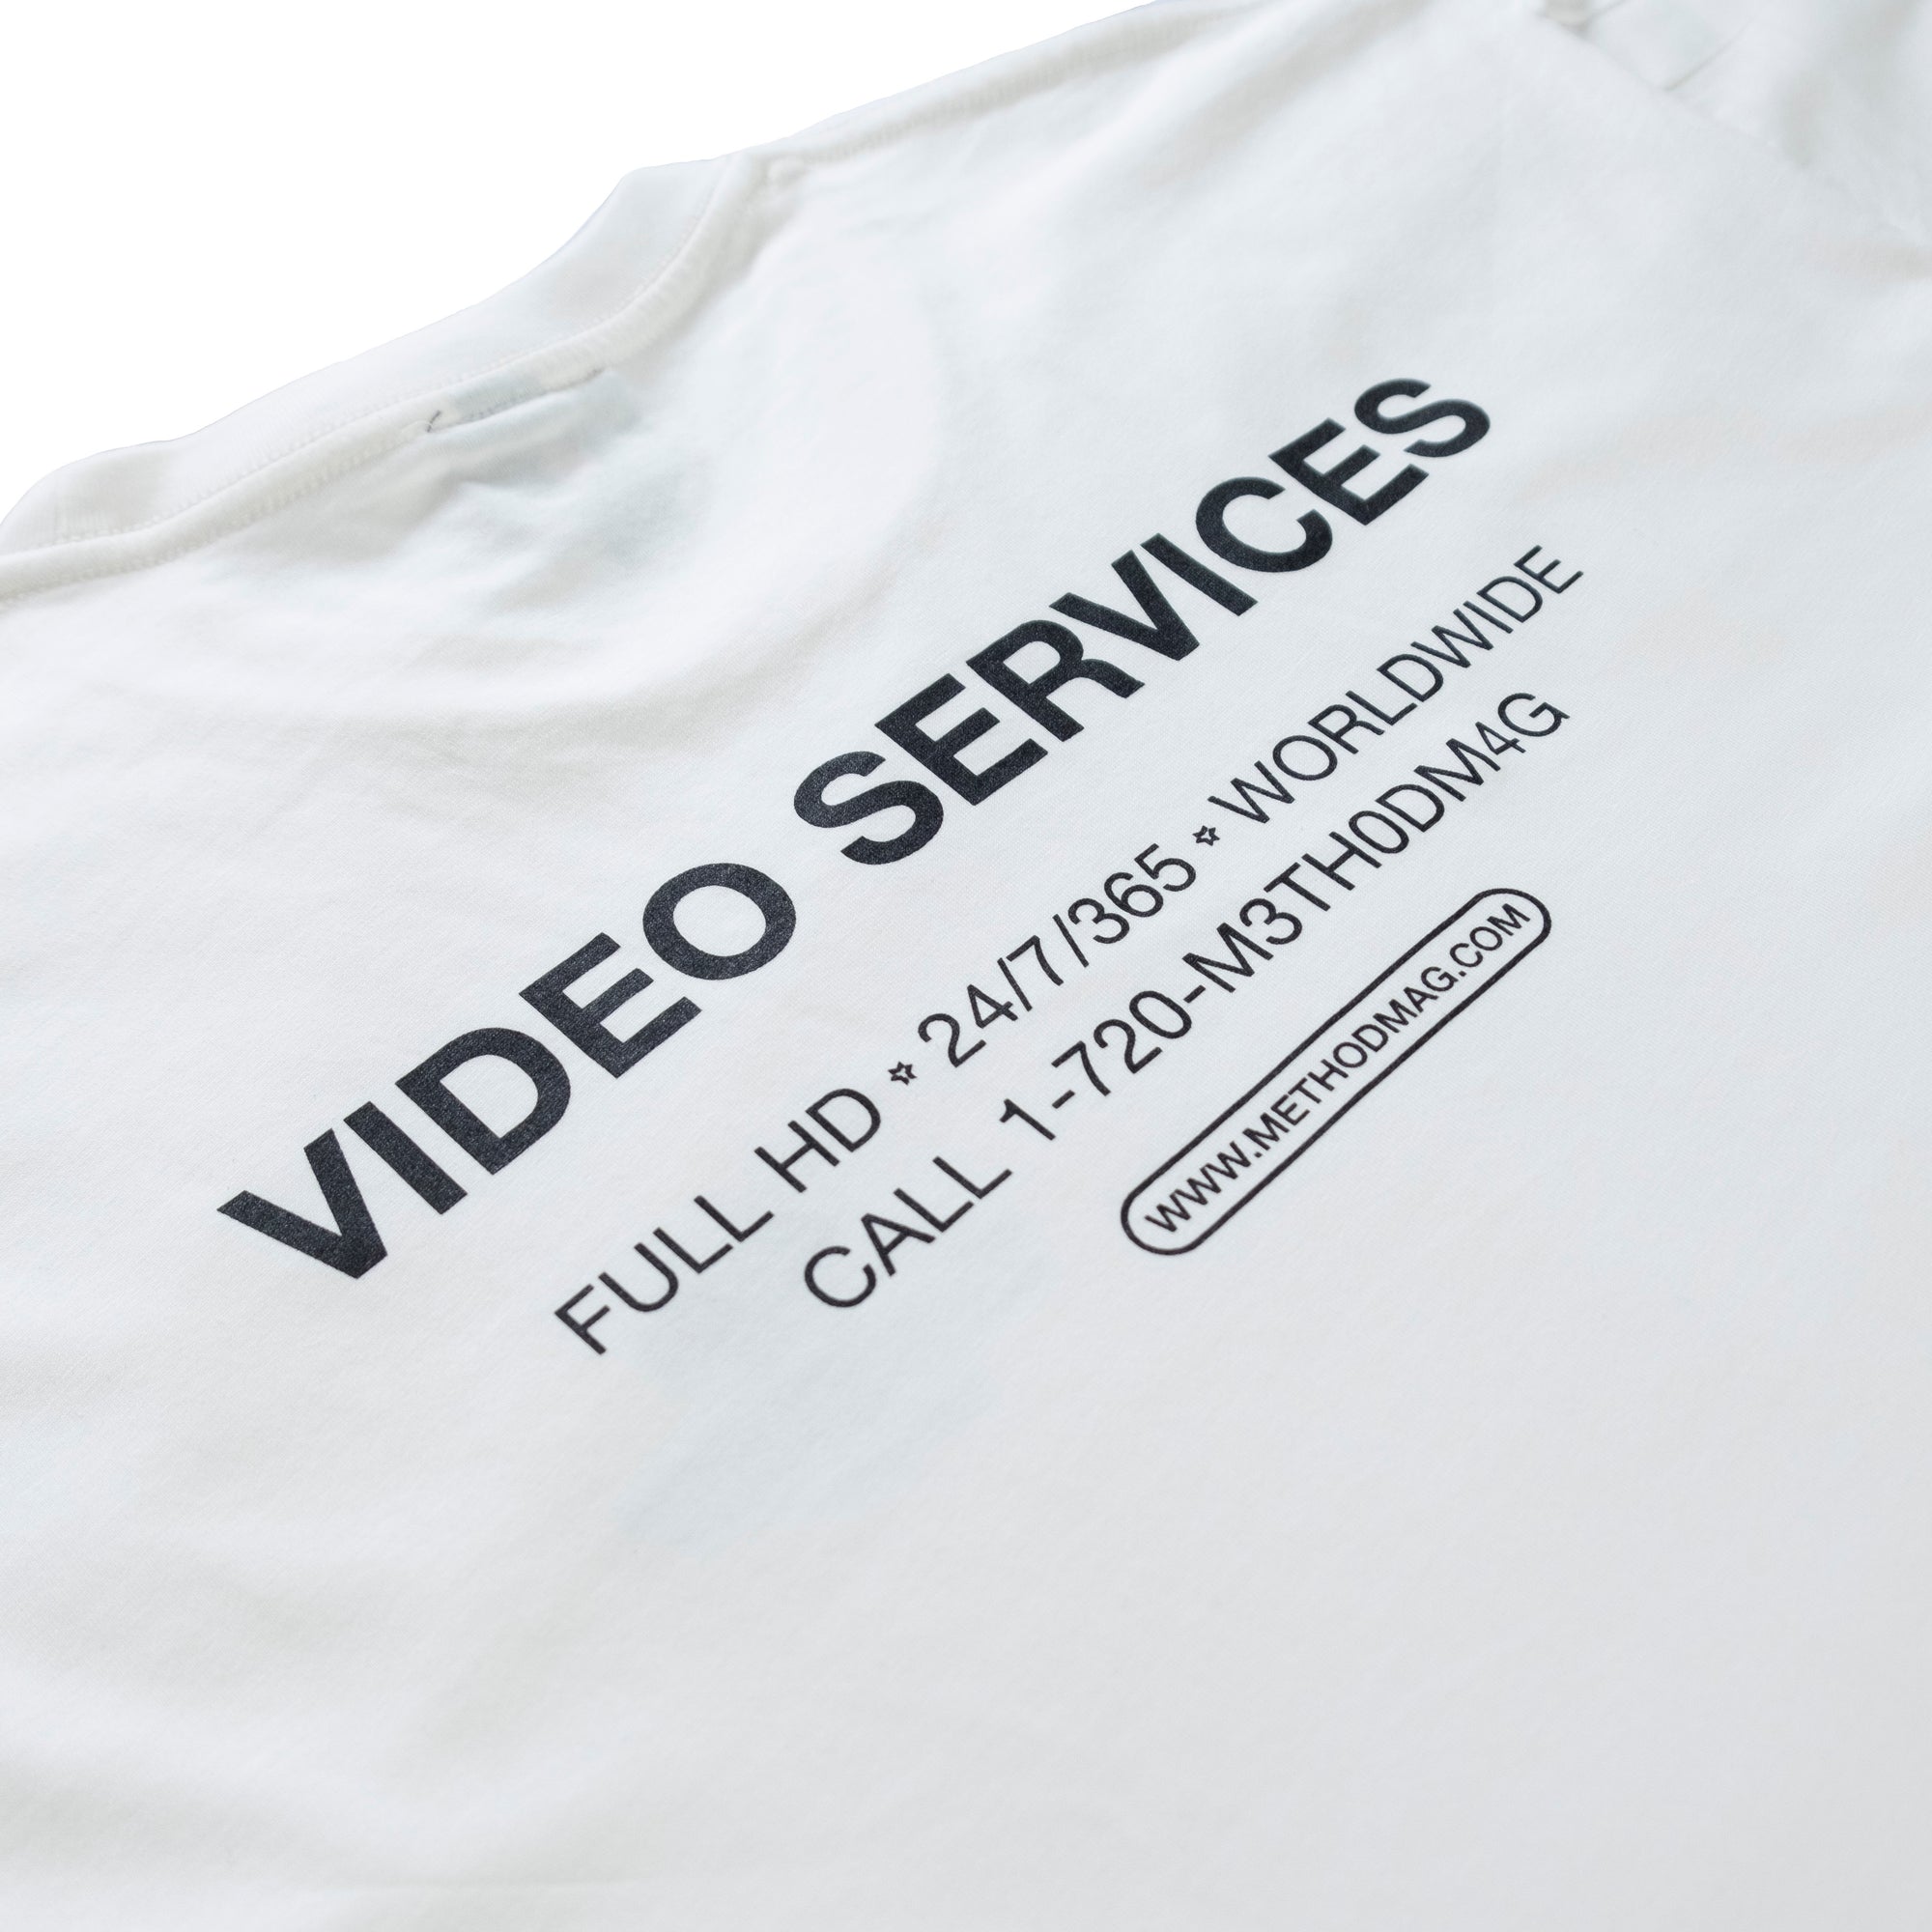 Method Video Services T-Shirt - Natural